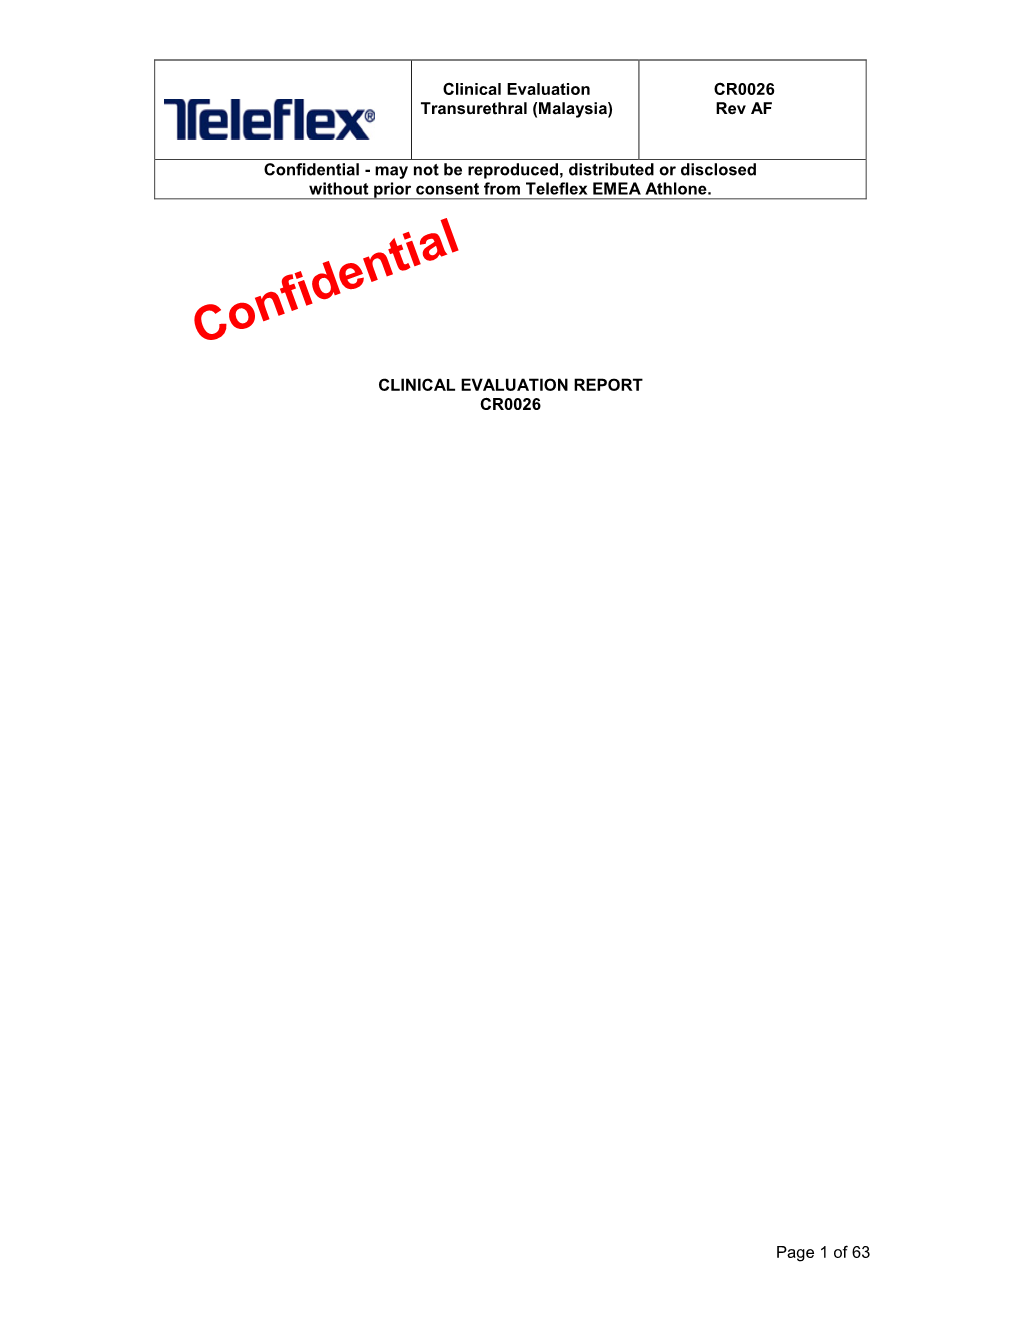 Confidential - May Not Be Reproduced, Distributed Or Disclosed Without Prior Consent from Teleflex EMEA Athlone